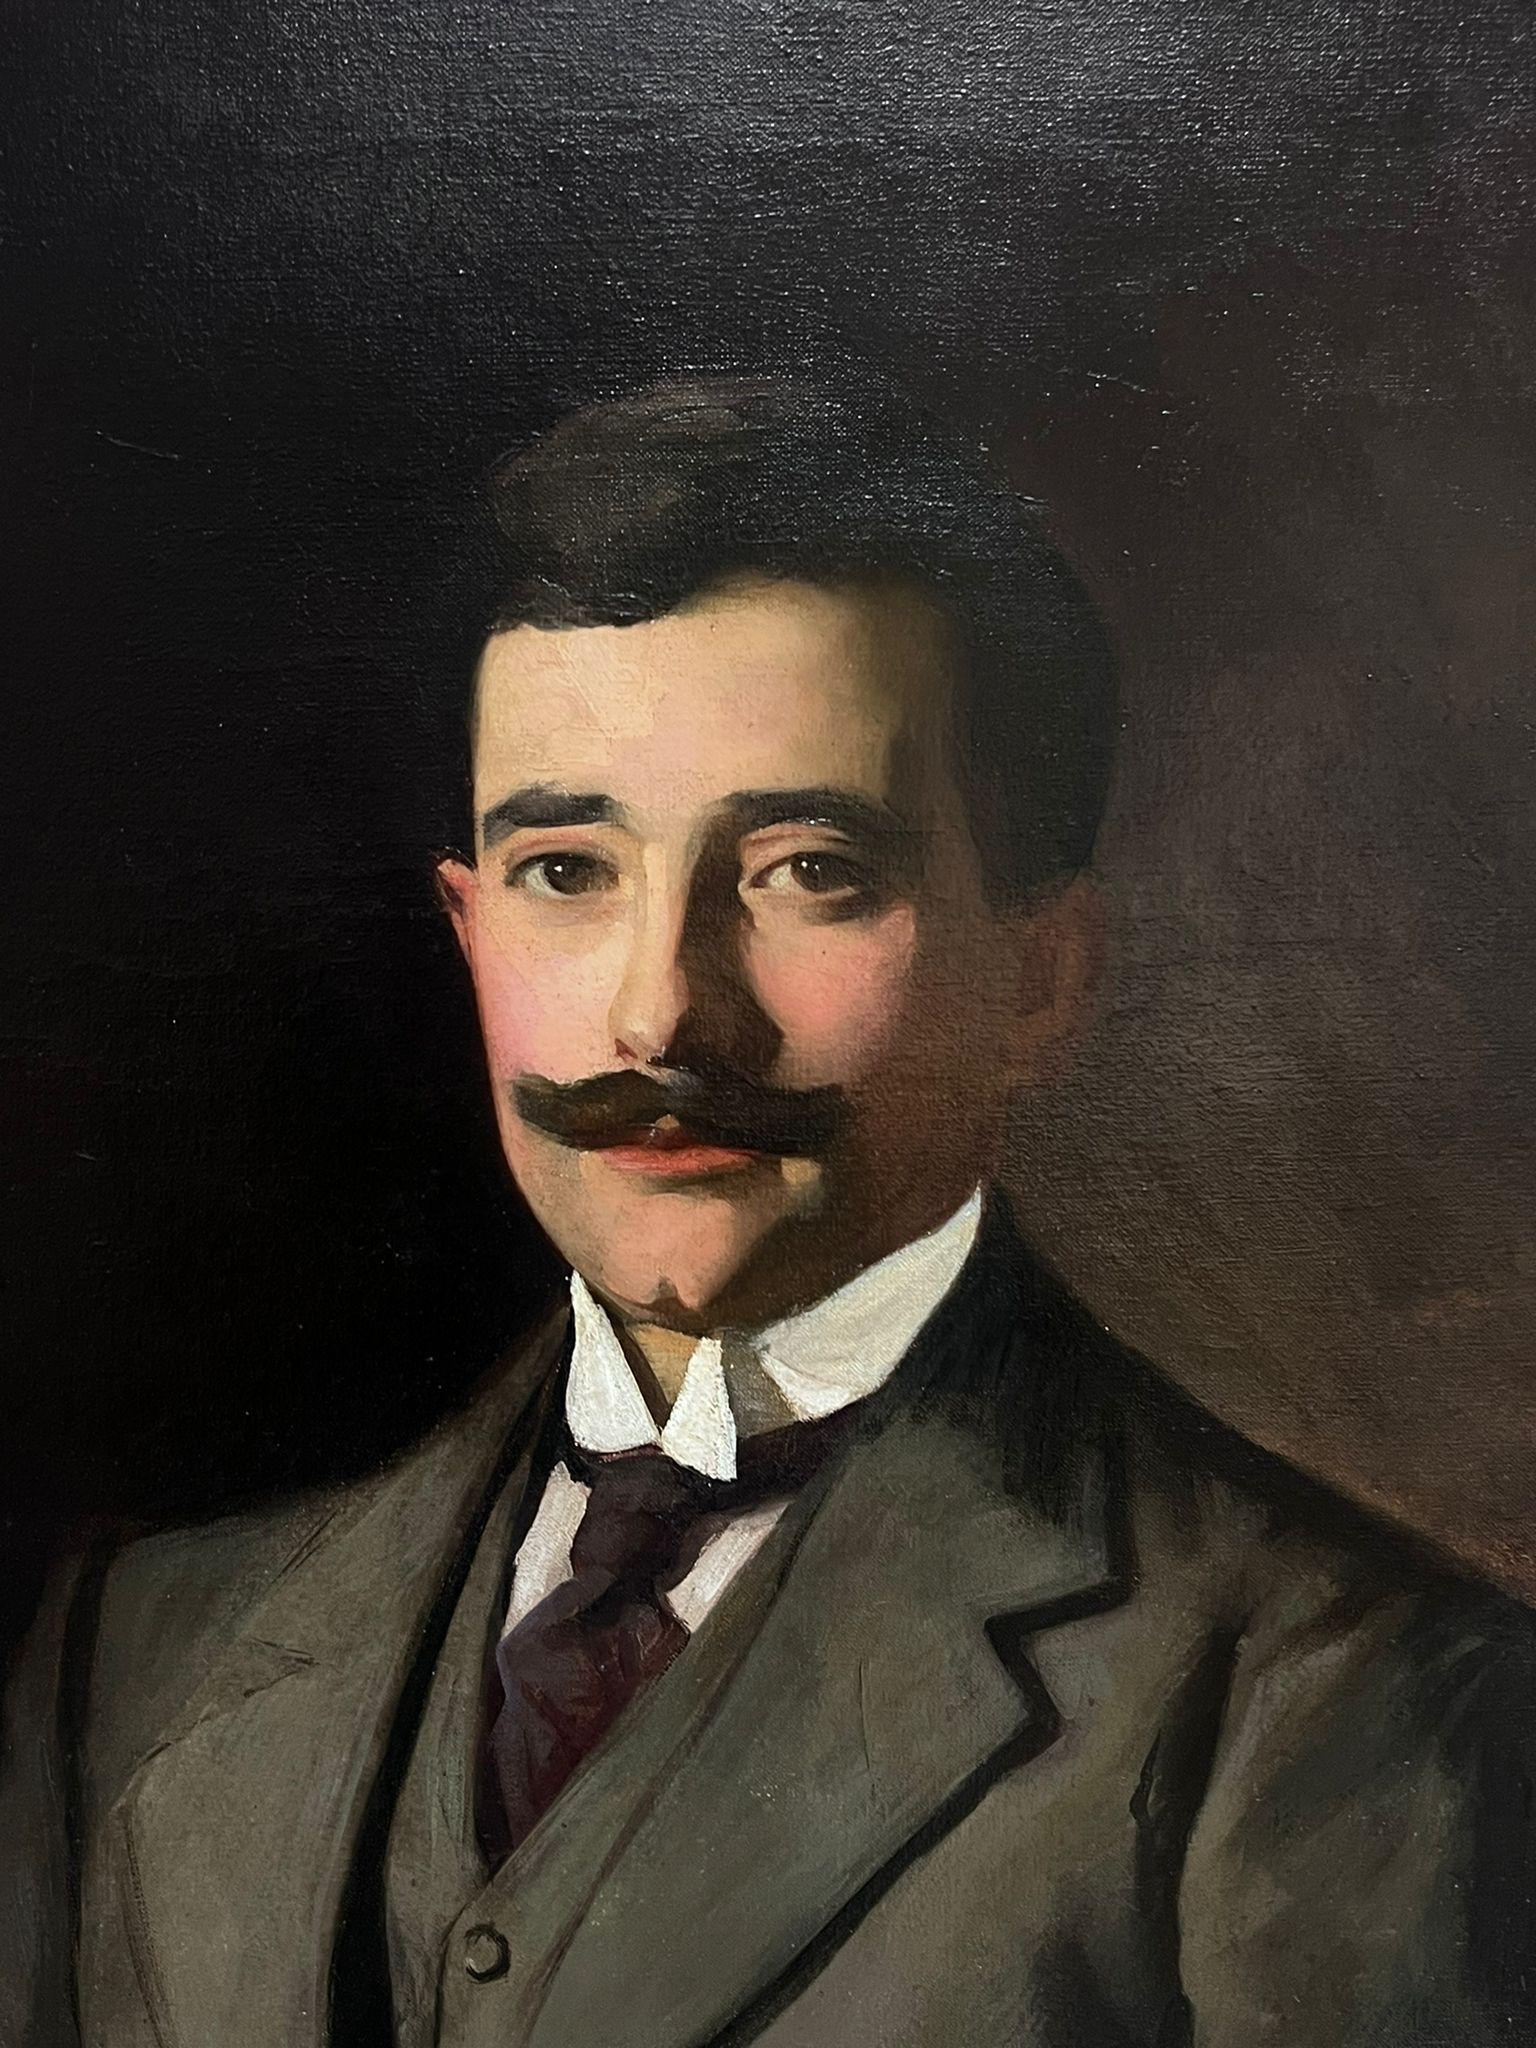 Portrait of a Distinguished Gentleman
by John Arthur Machray Hay (Scottish, 1887-1960) 
signed and dated 1910 
oil on canvas, unframed 
canvas: 30 x 24 inches 
provenance: private collection, UK 
condition: very good and sound condition   

Portrait